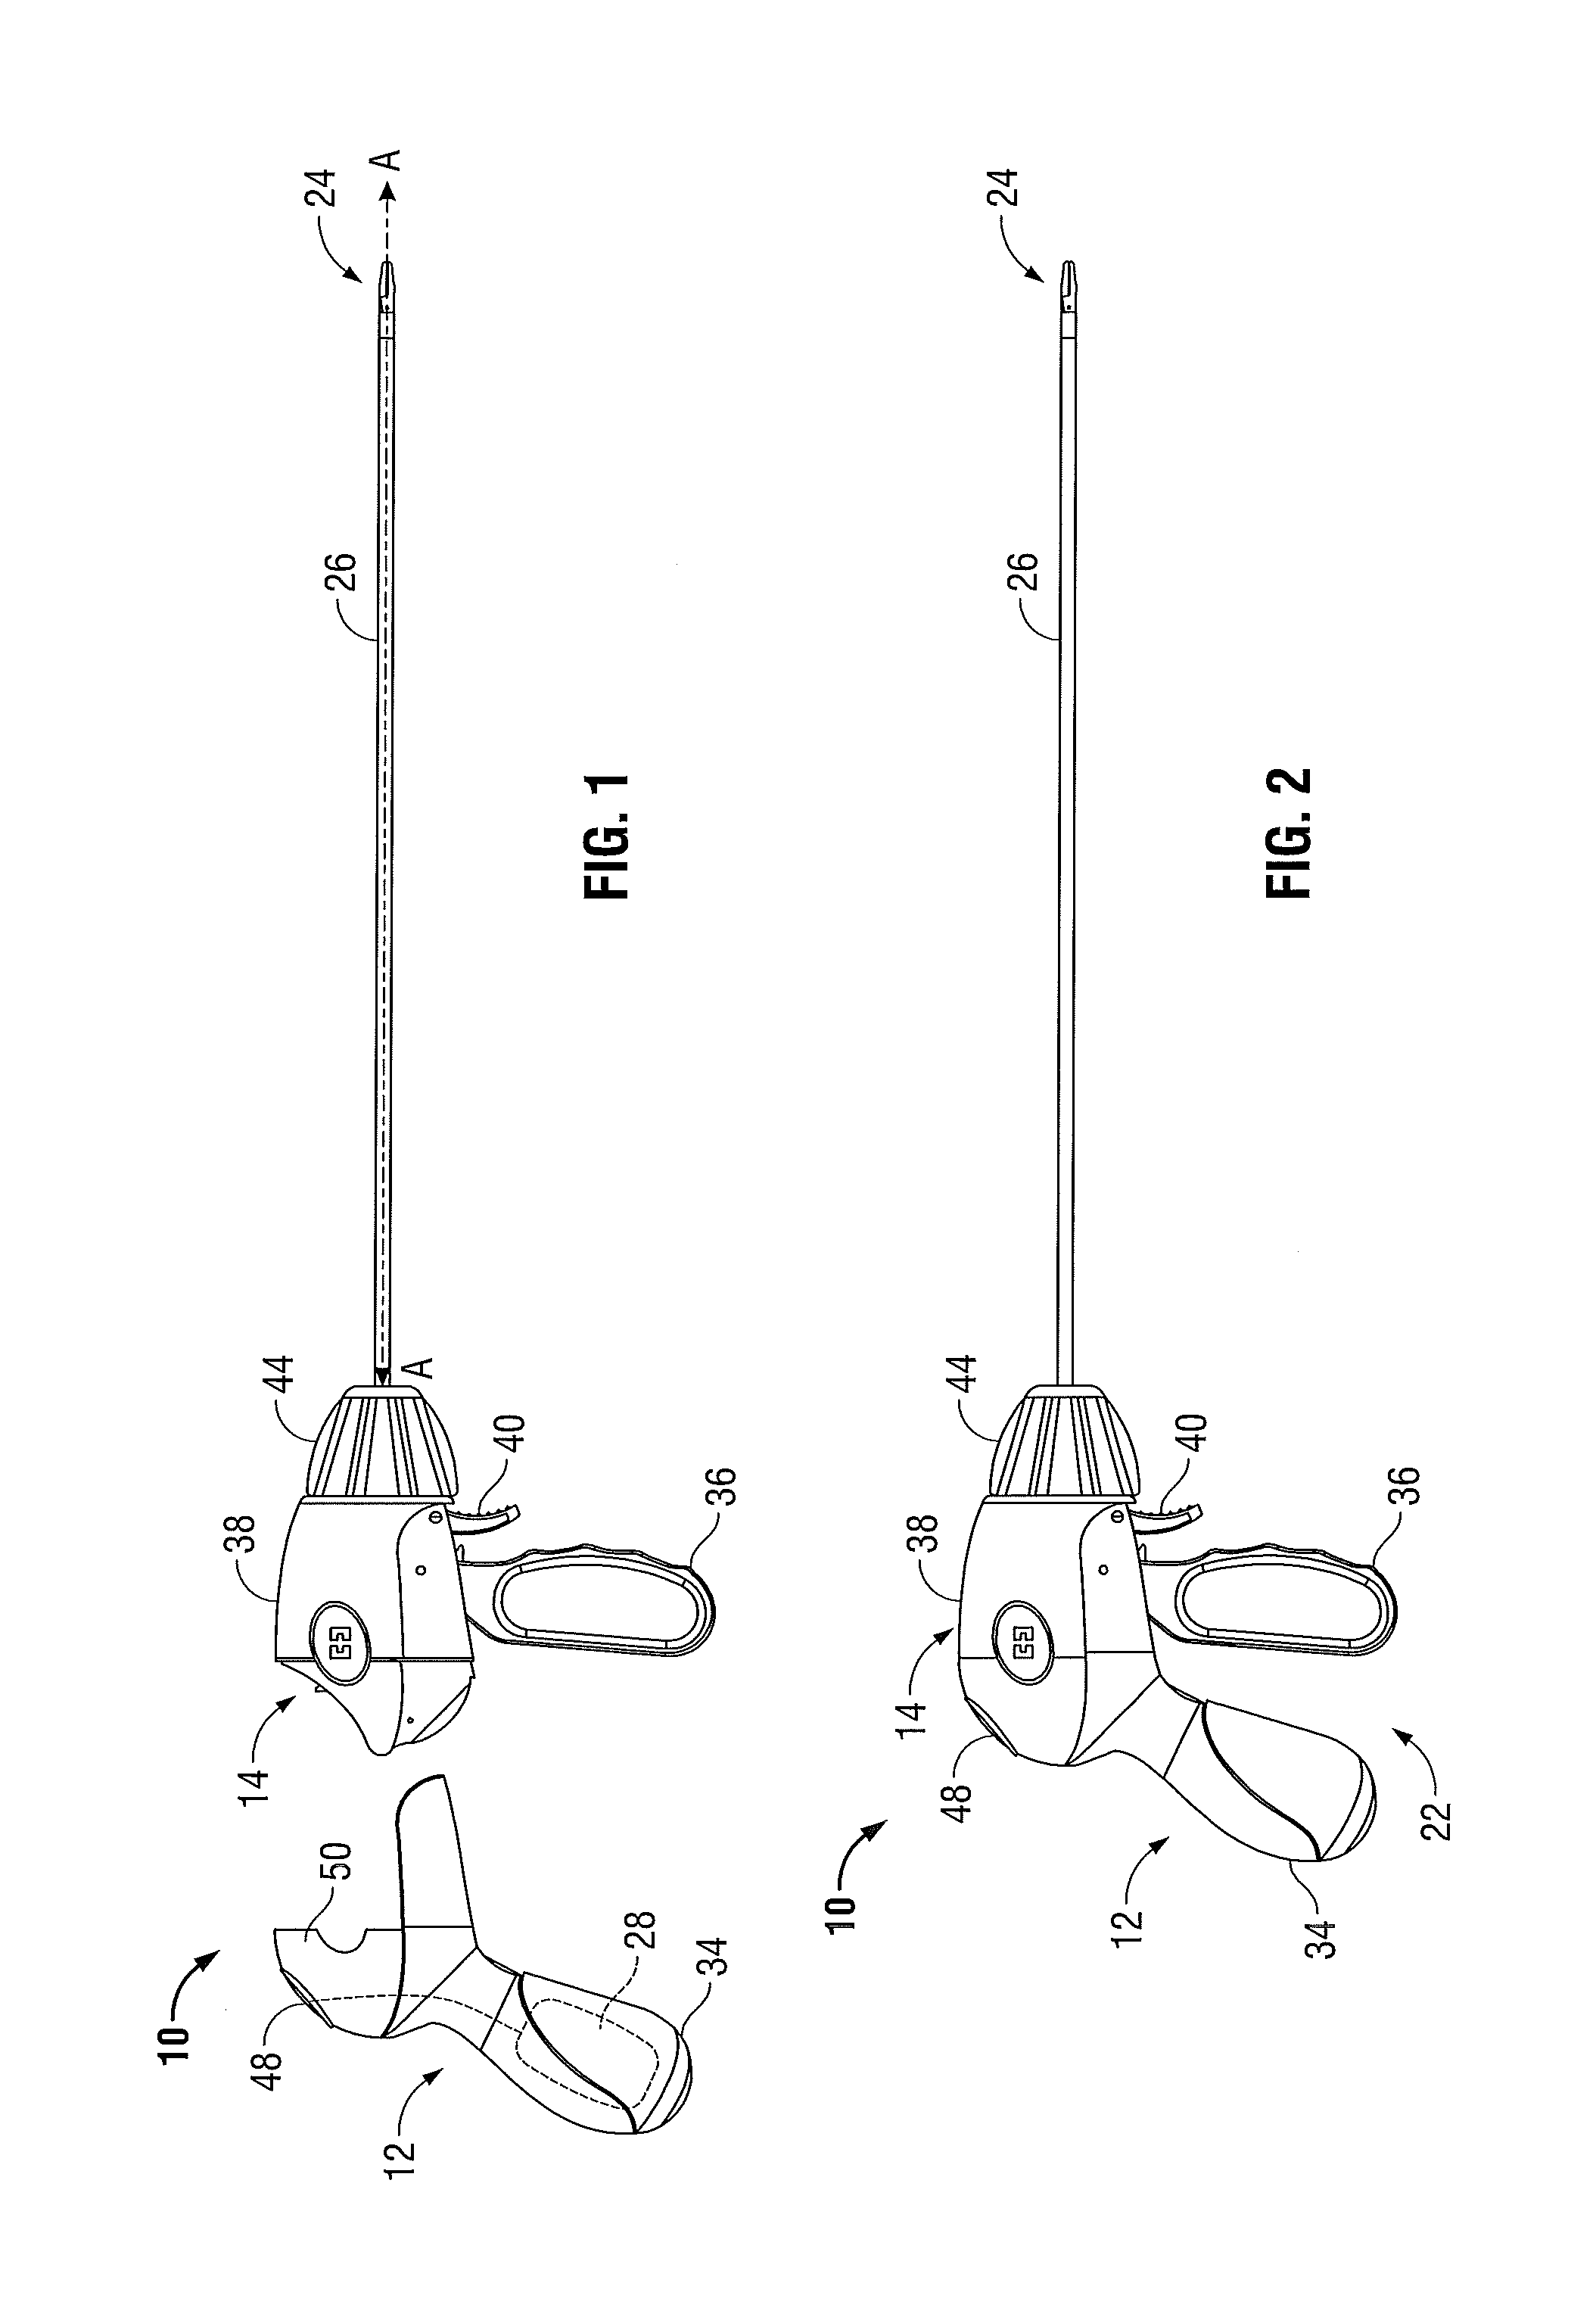 Partitioned surgical instrument